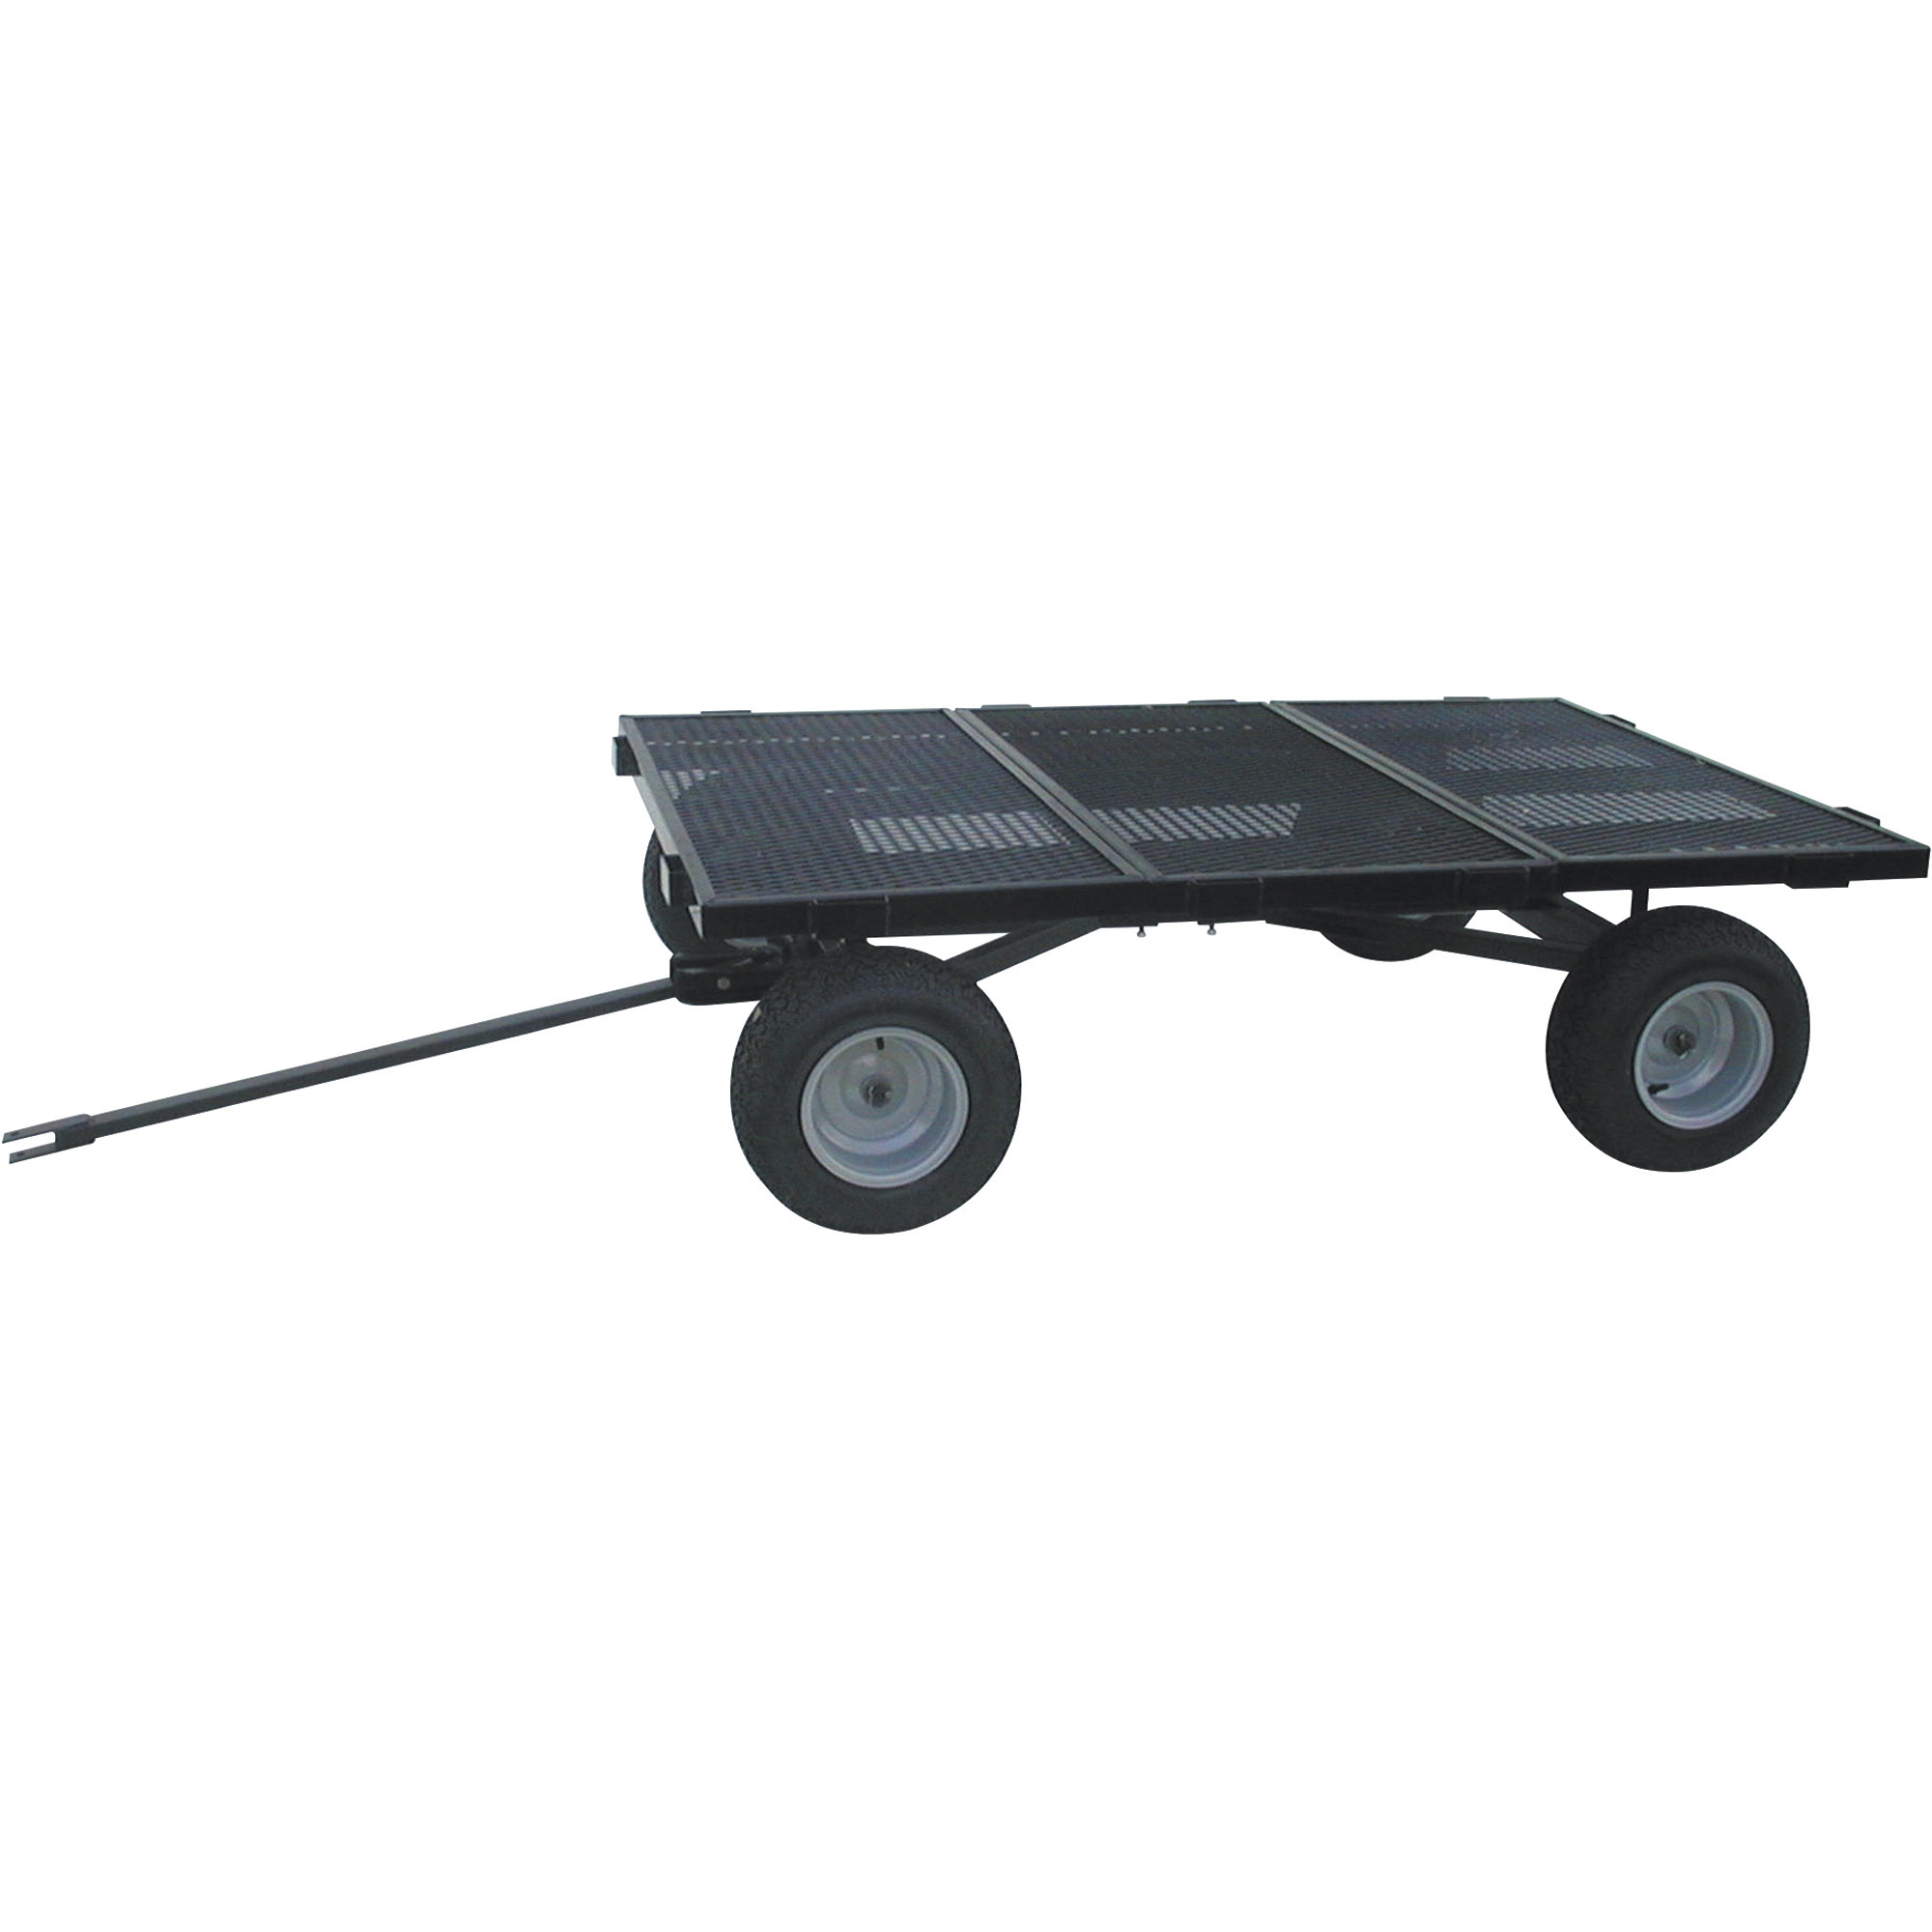 Metal Deck For Garden Wagon Item#s 125415 and 03813, Model 04014